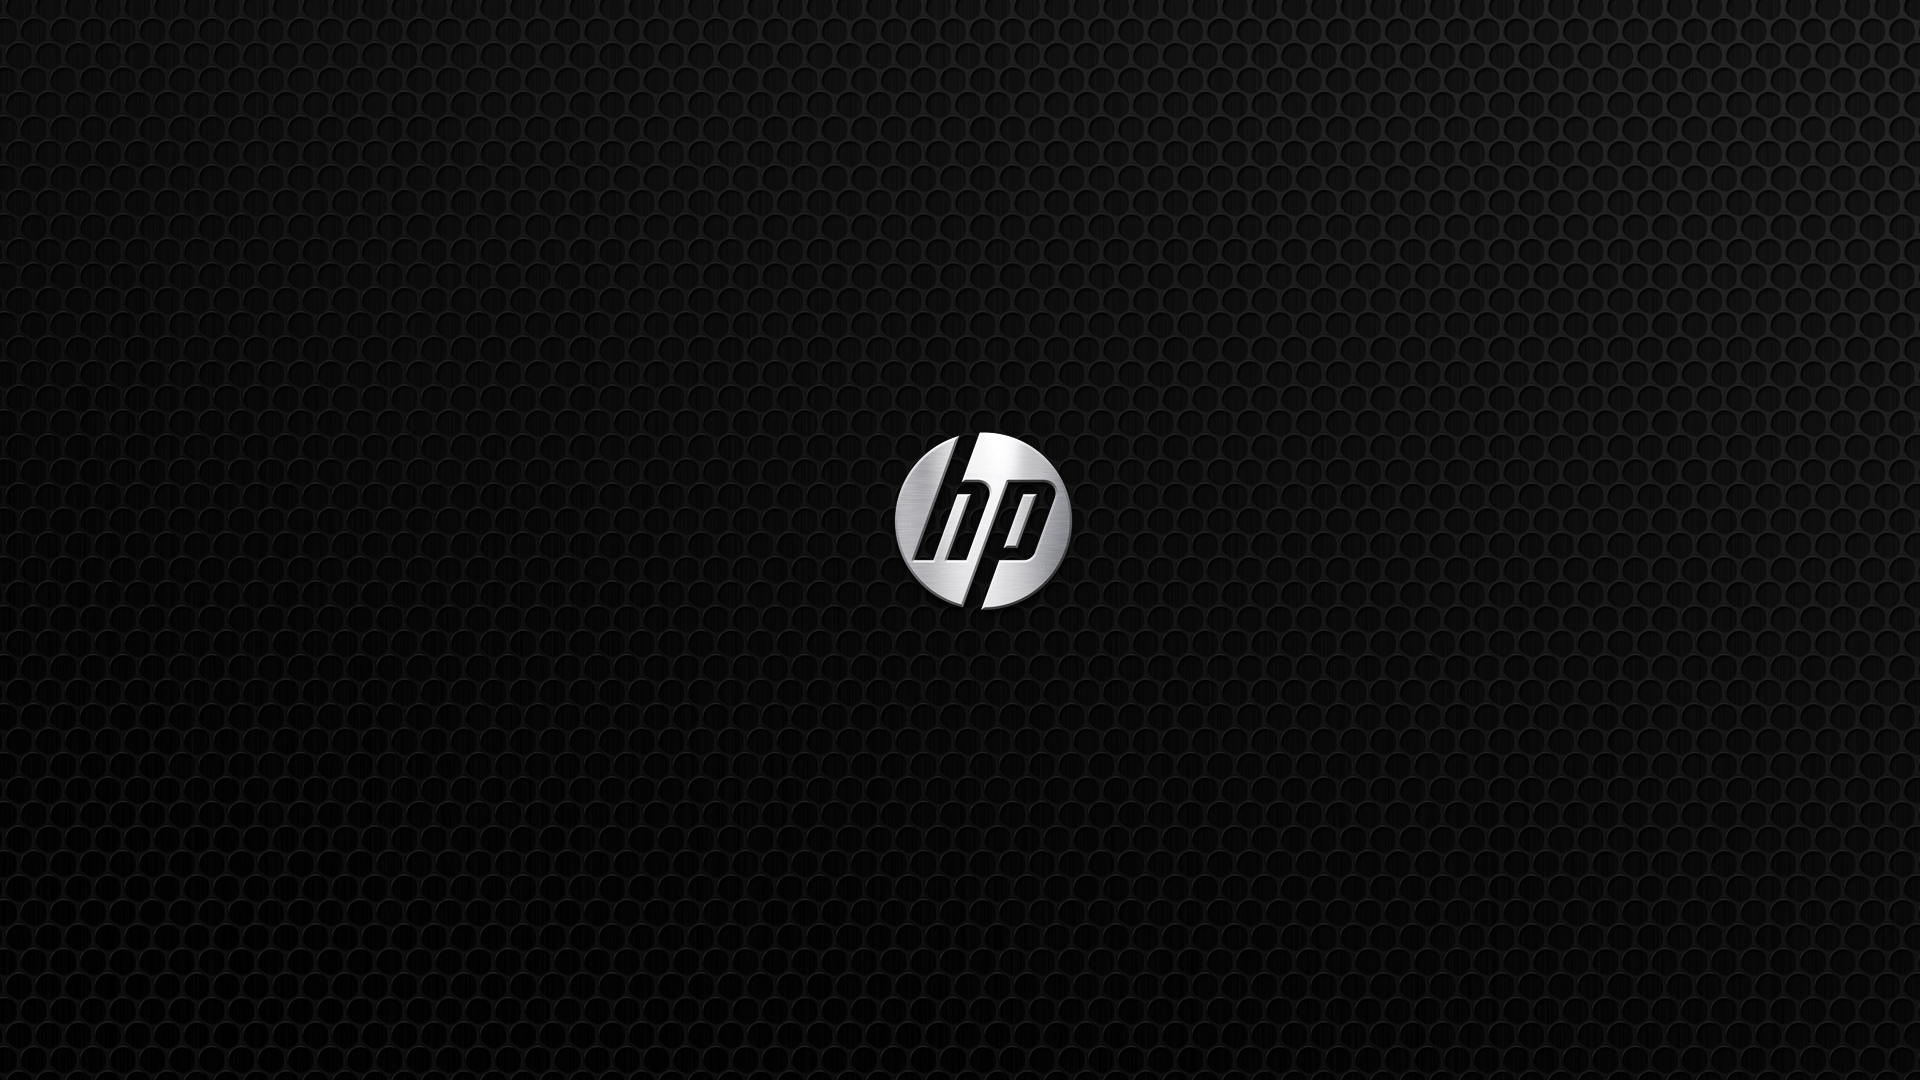 Hp Wallpaper Wallpaper Background of Your Choice